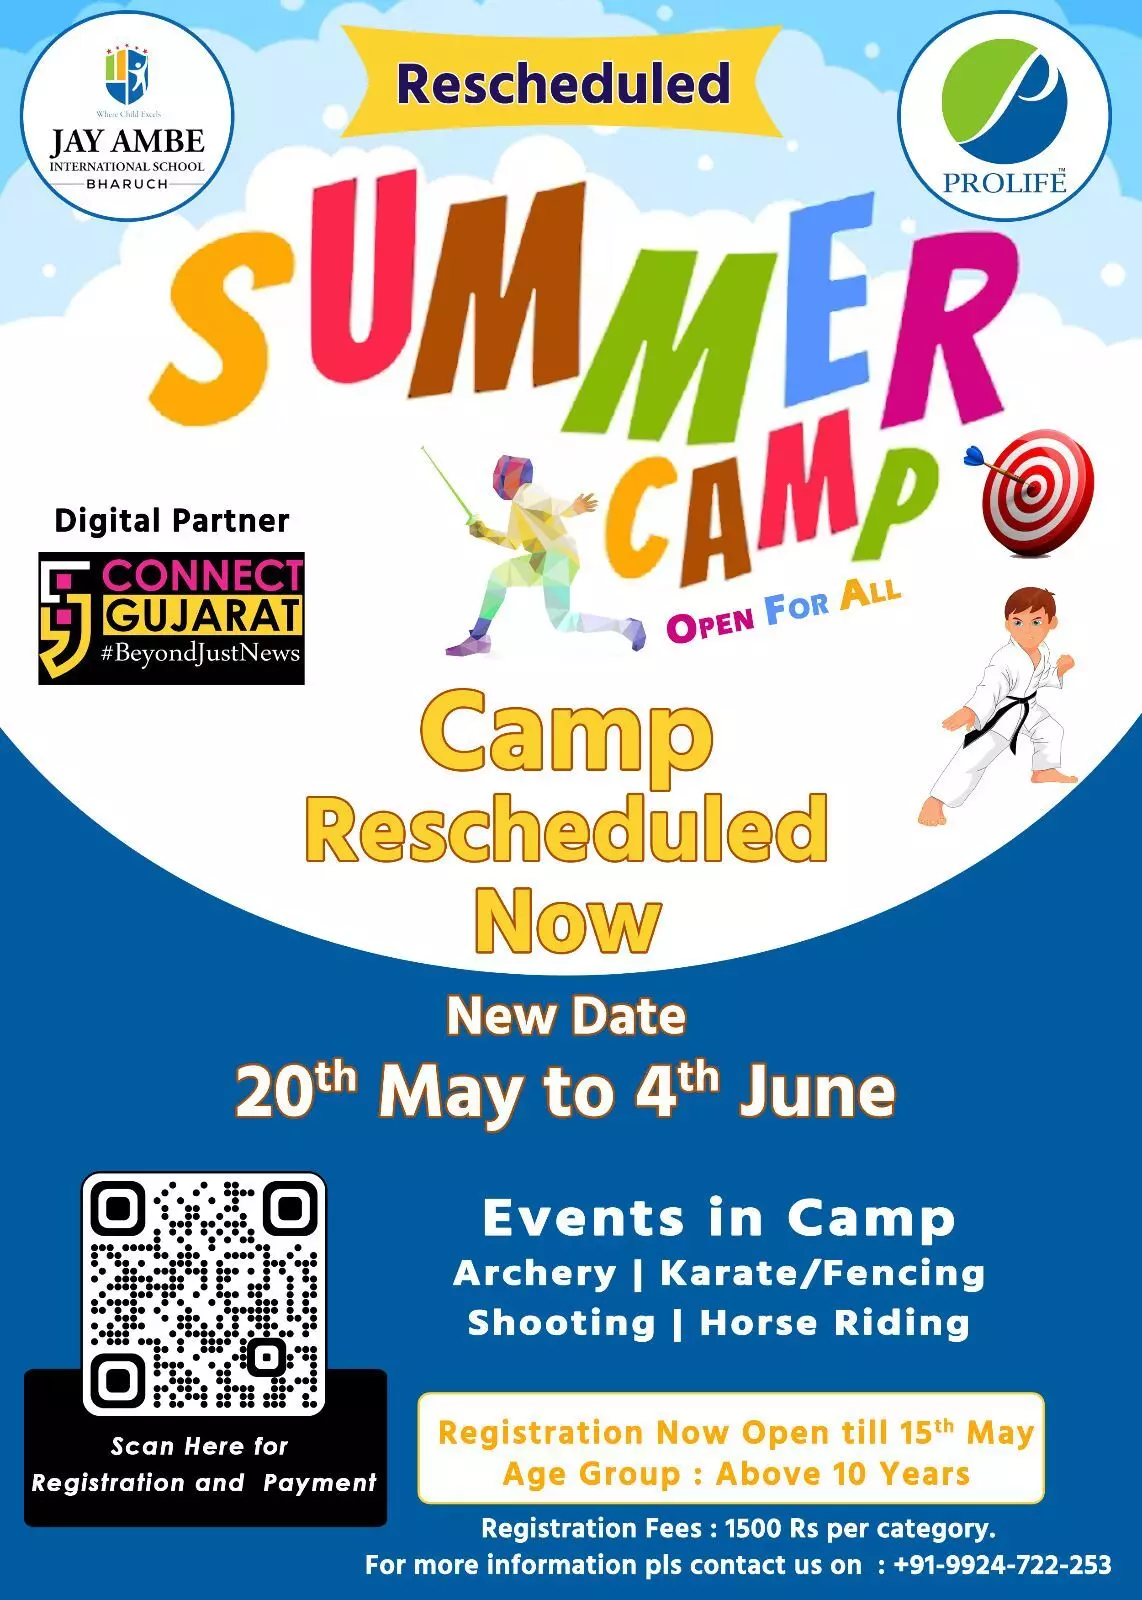 A summer camp has been organized at Jay Ambe International School, Bharuch with the support of Prolife Foundation